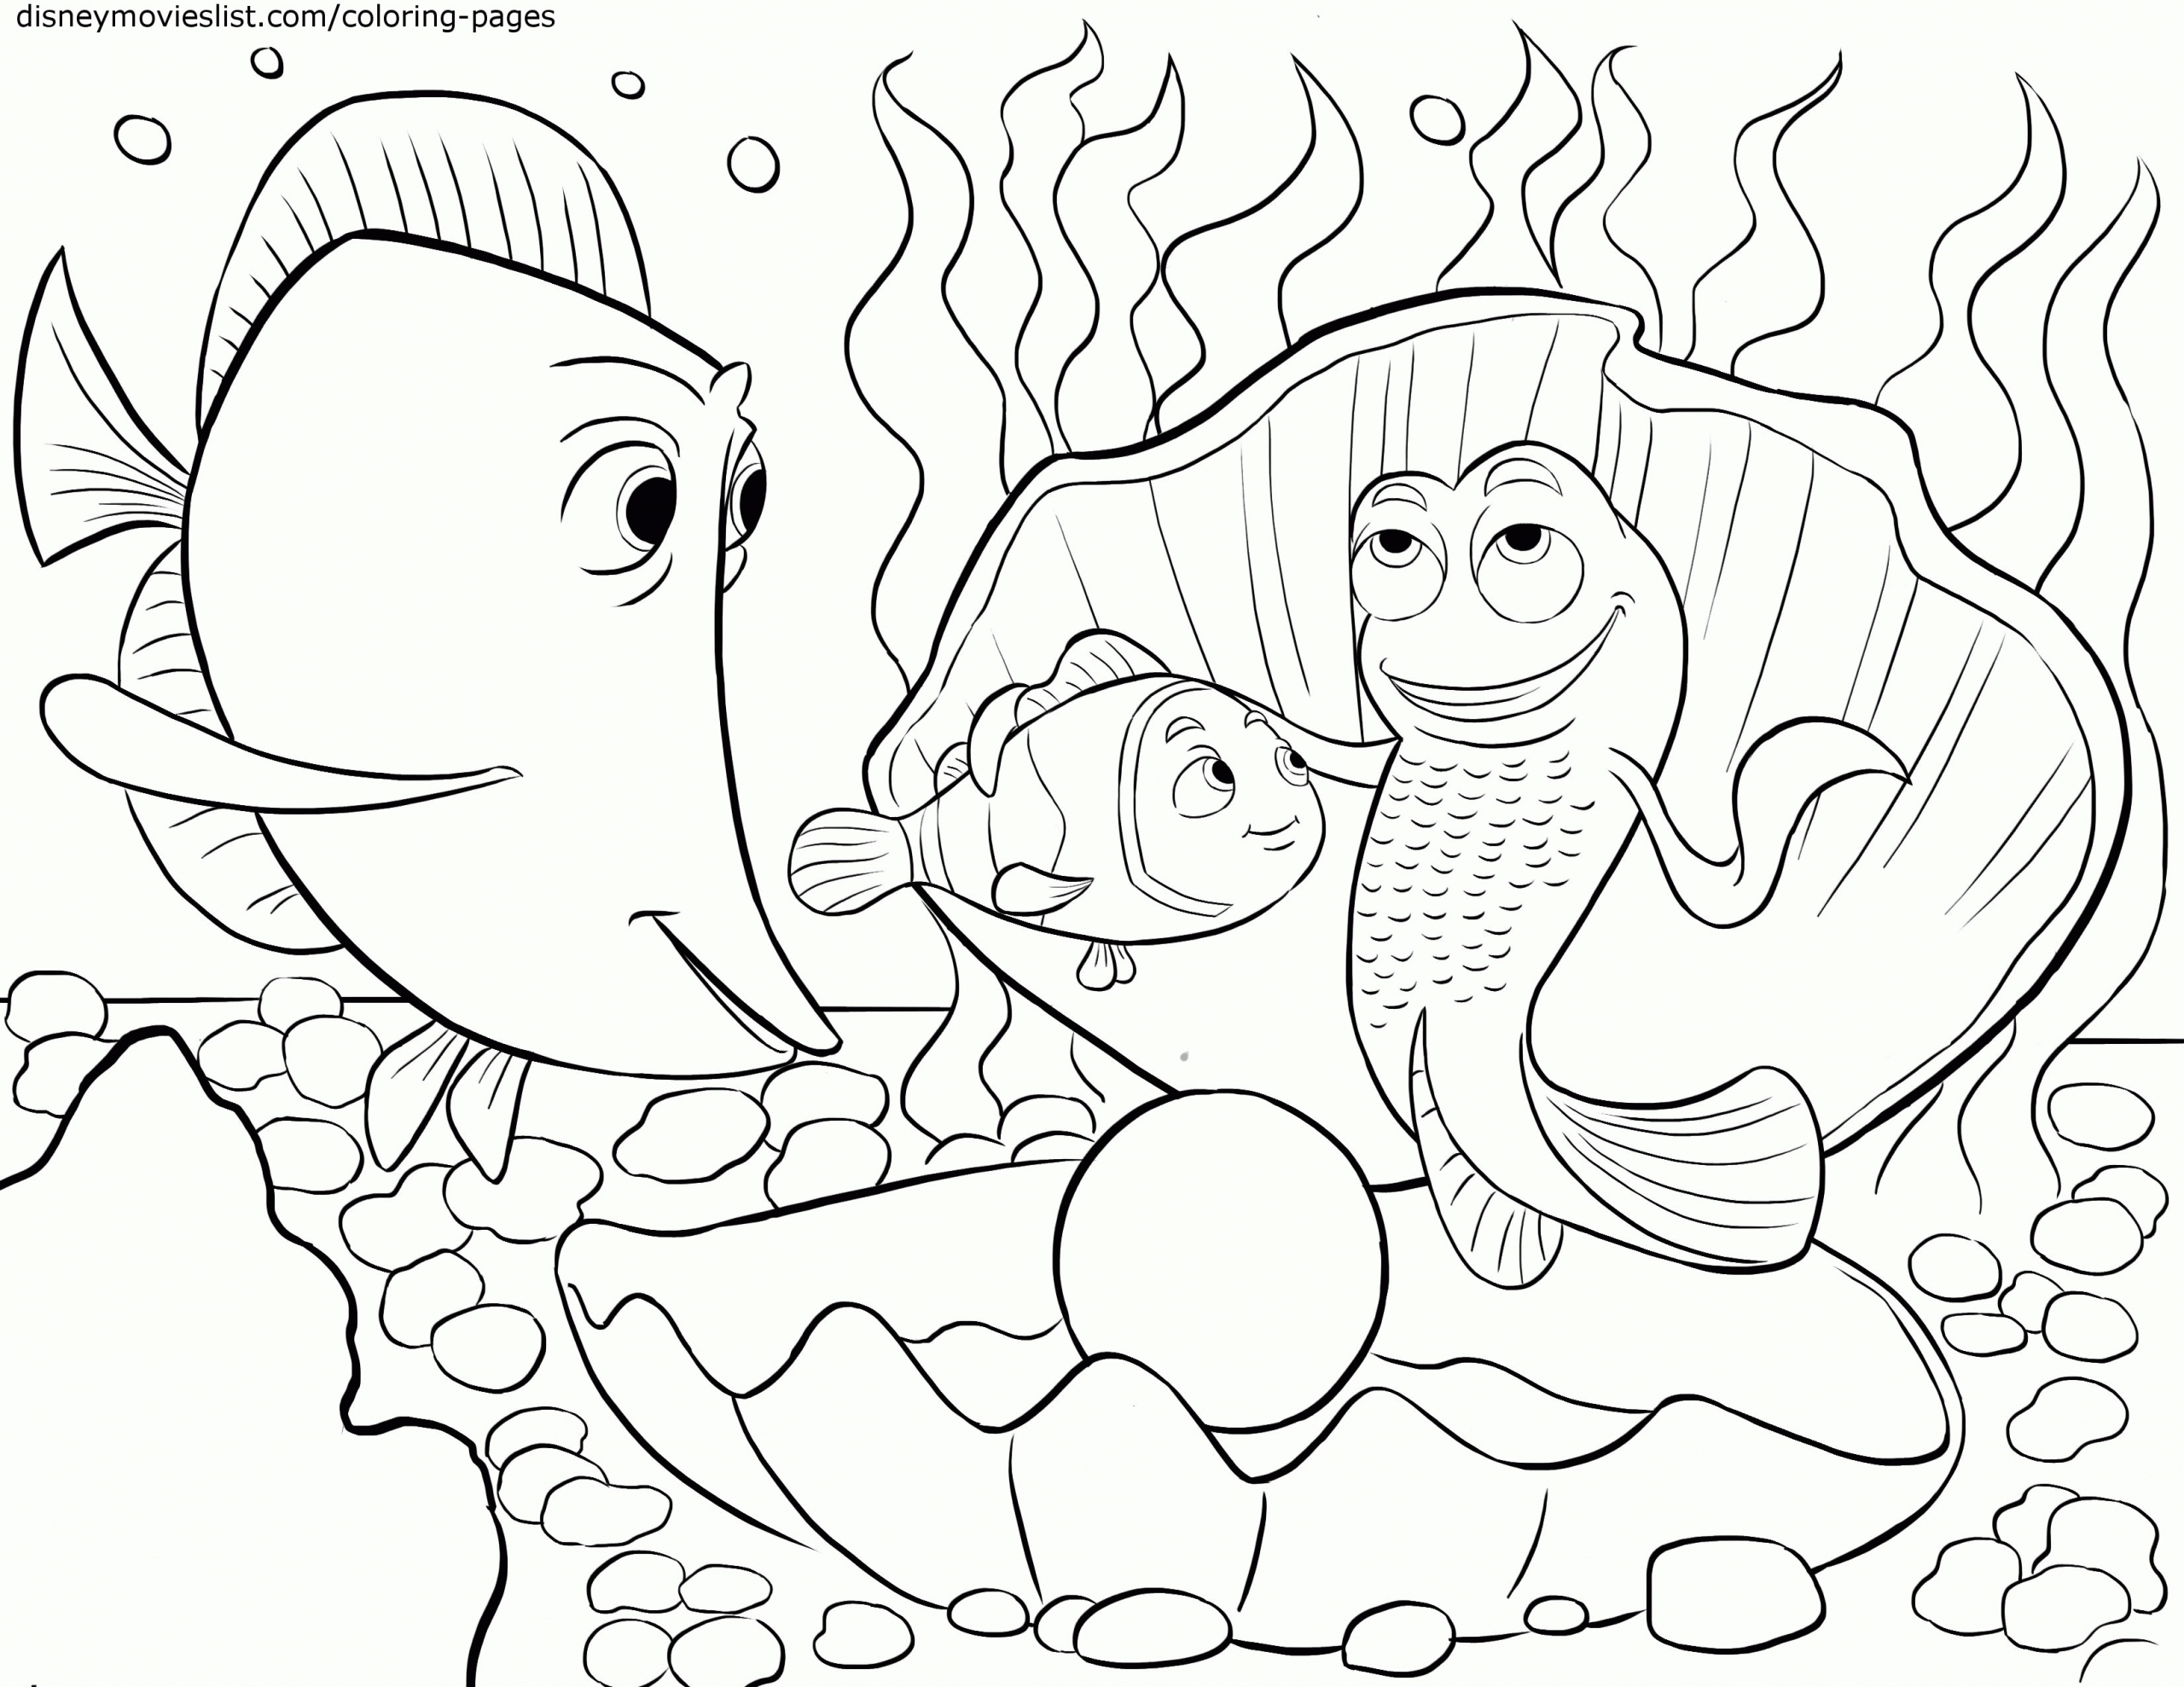 Coloring Pages For Toddlers Pdf
 Disney Coloring Pages Pdf Coloring Home